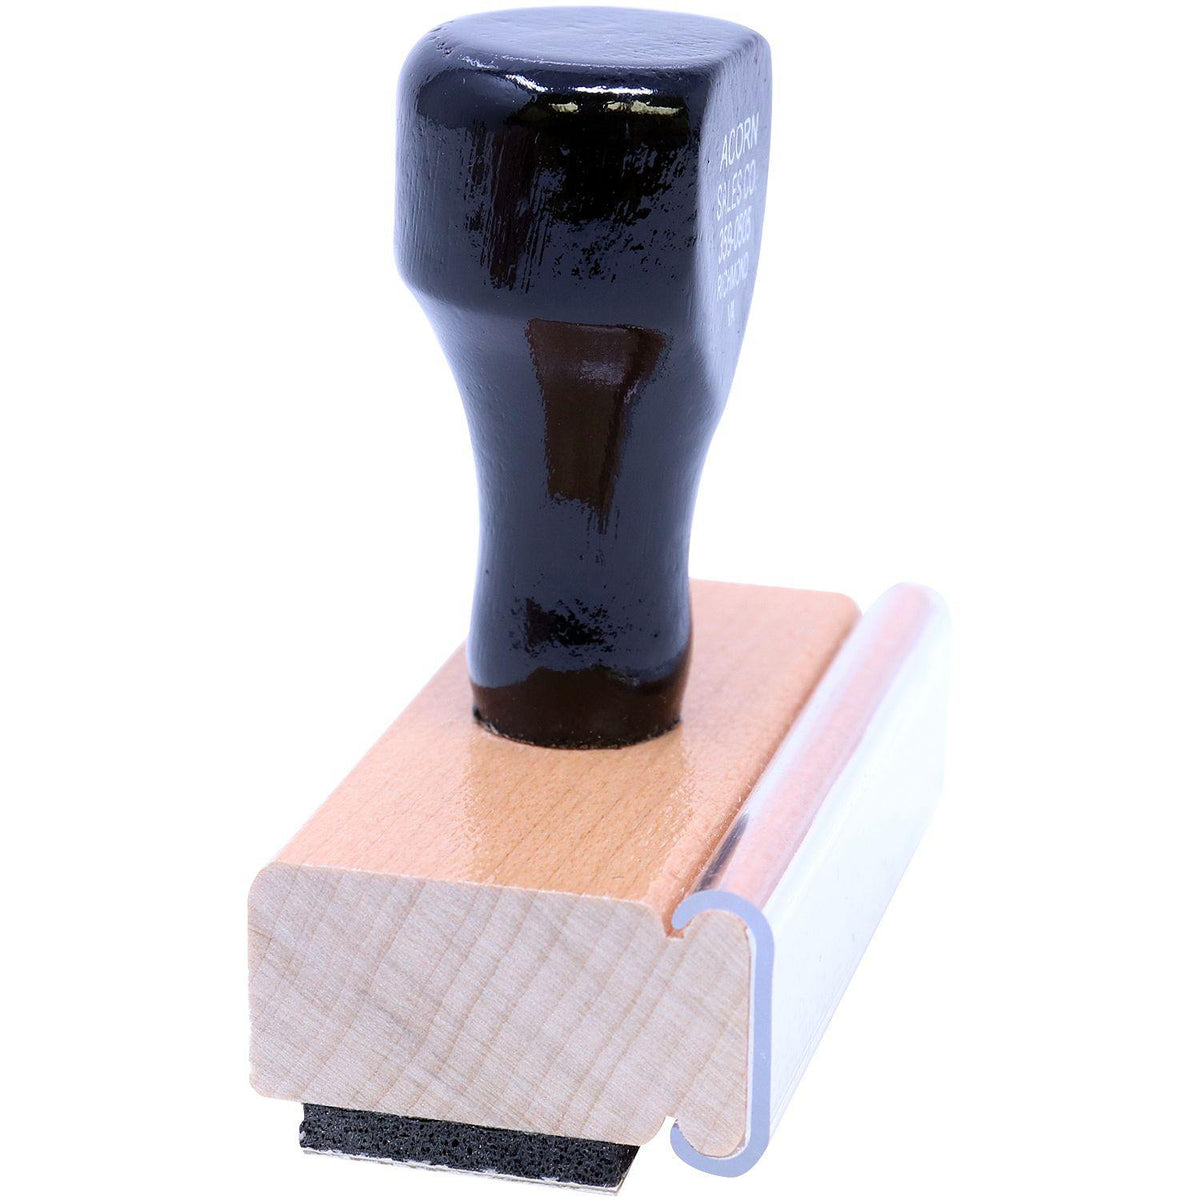 Side View of Large Fragile Rubber Stamp at an Angle